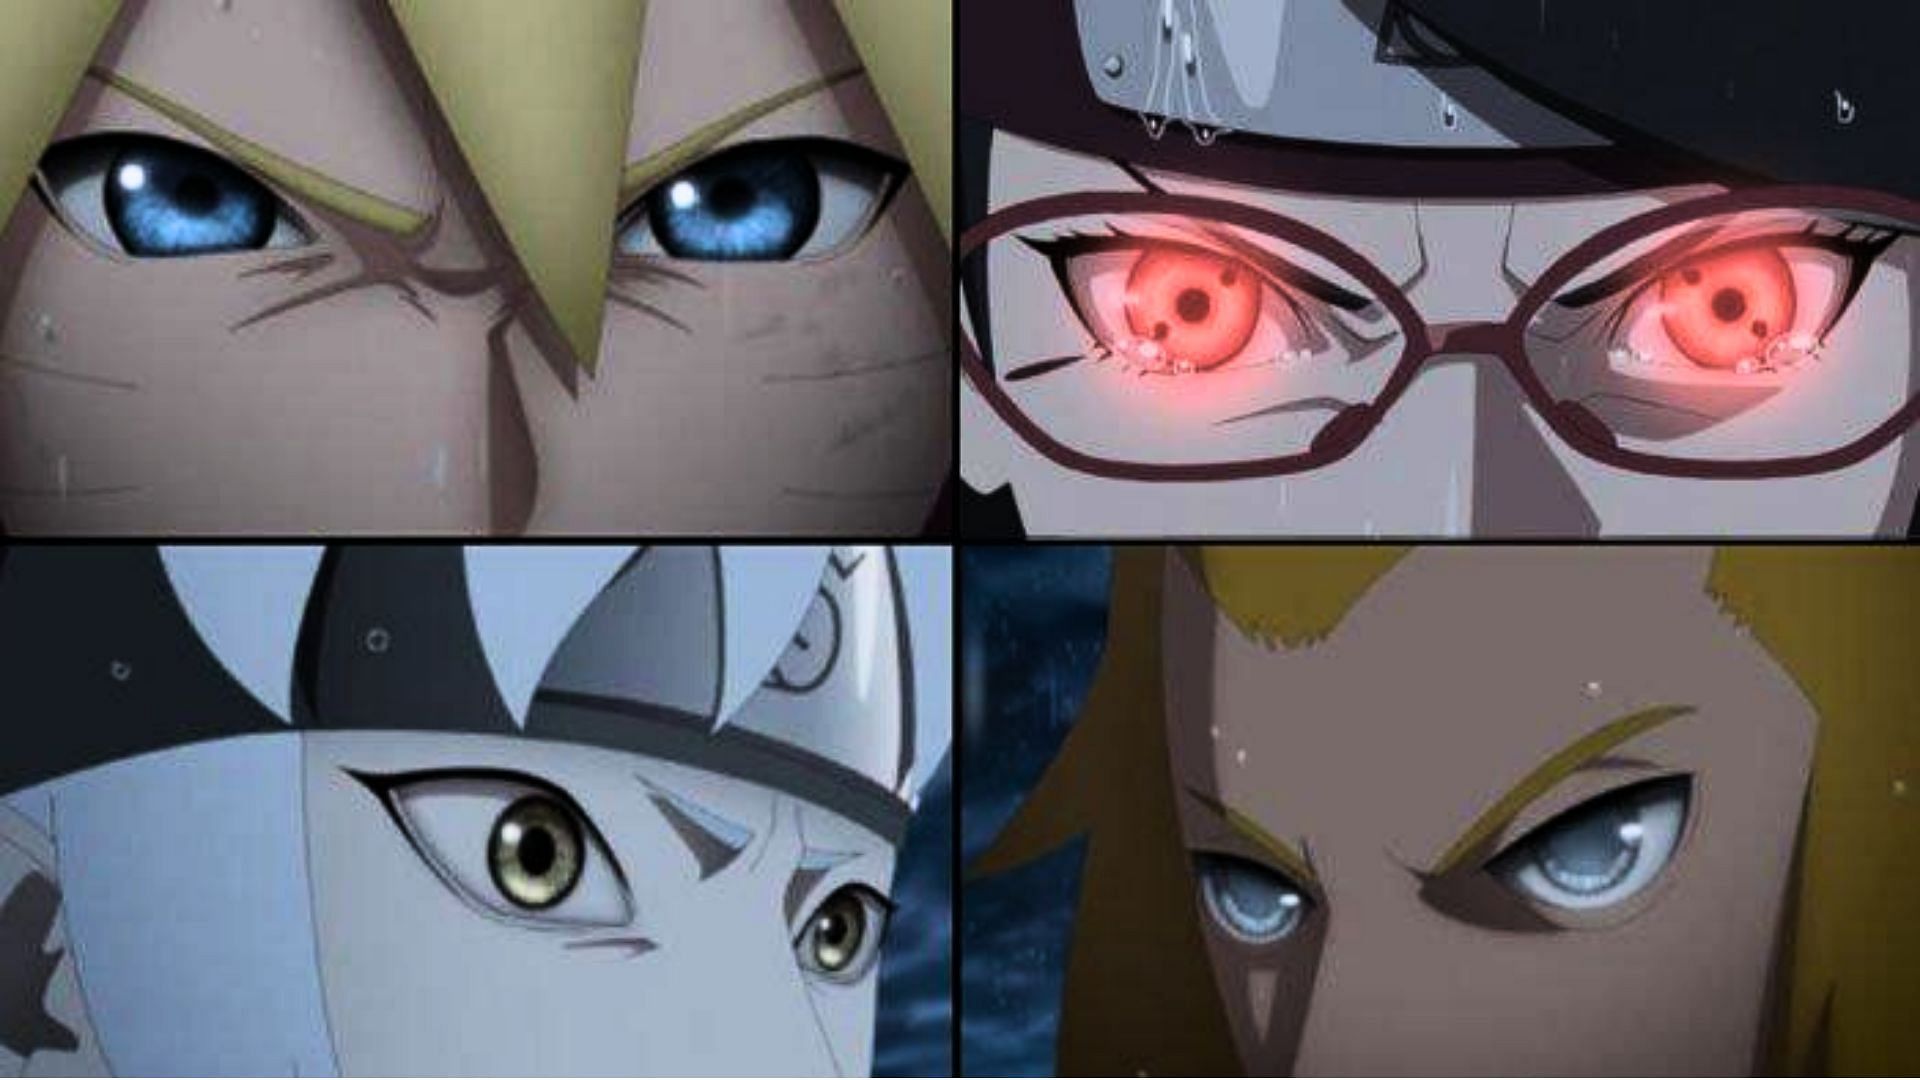 Boruto Part 2 leaks reveal disappointing details (Image via Pierrot)